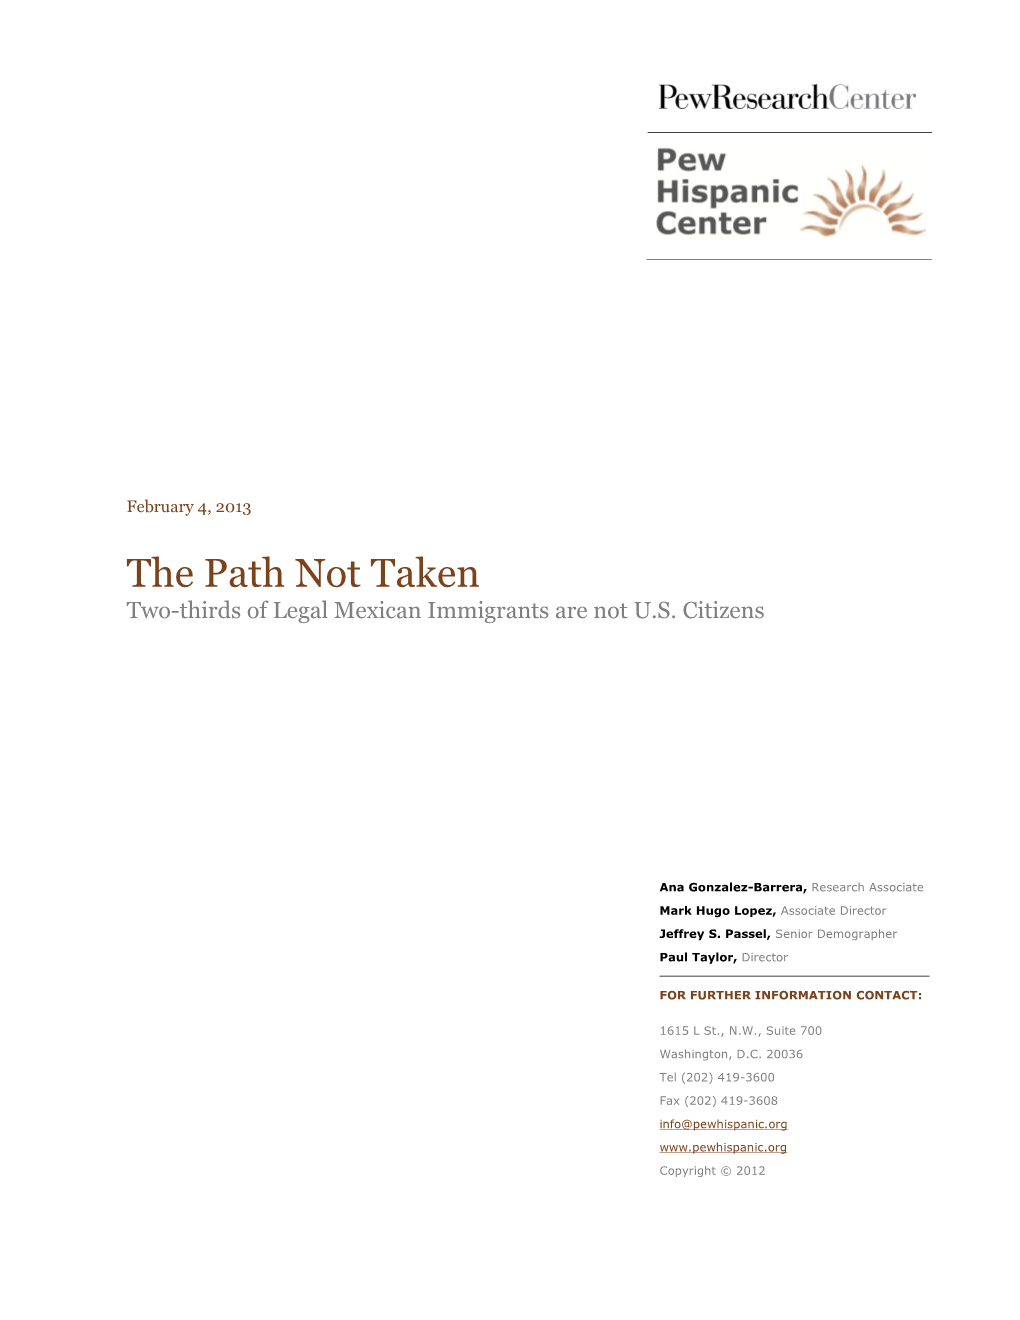 The Path Not Taken: Two-Thirds of Legal Mexican Immigrants Are Not US Citizens